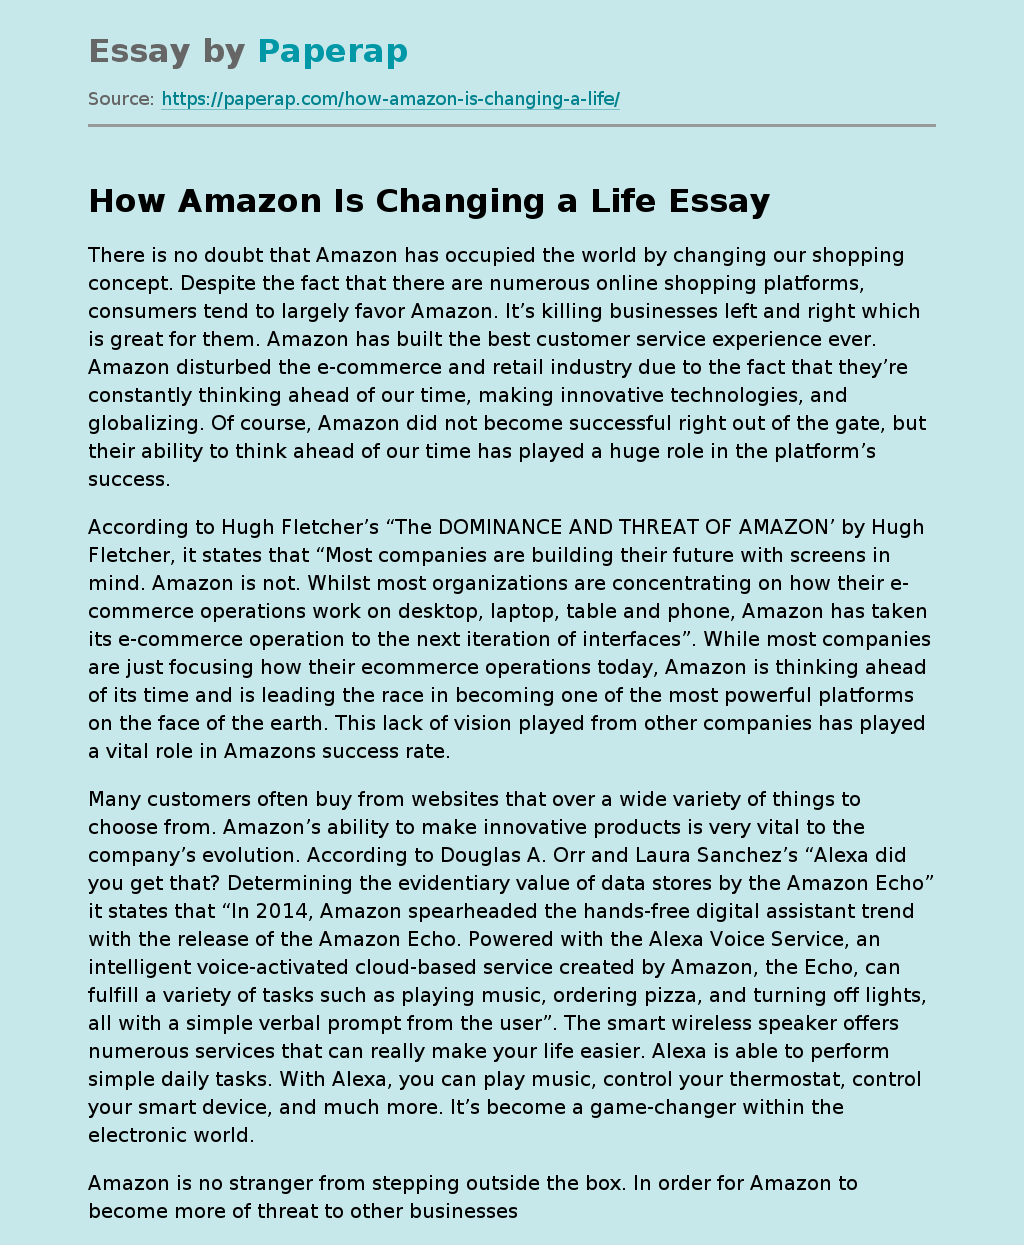 How Amazon Is Changing a Life